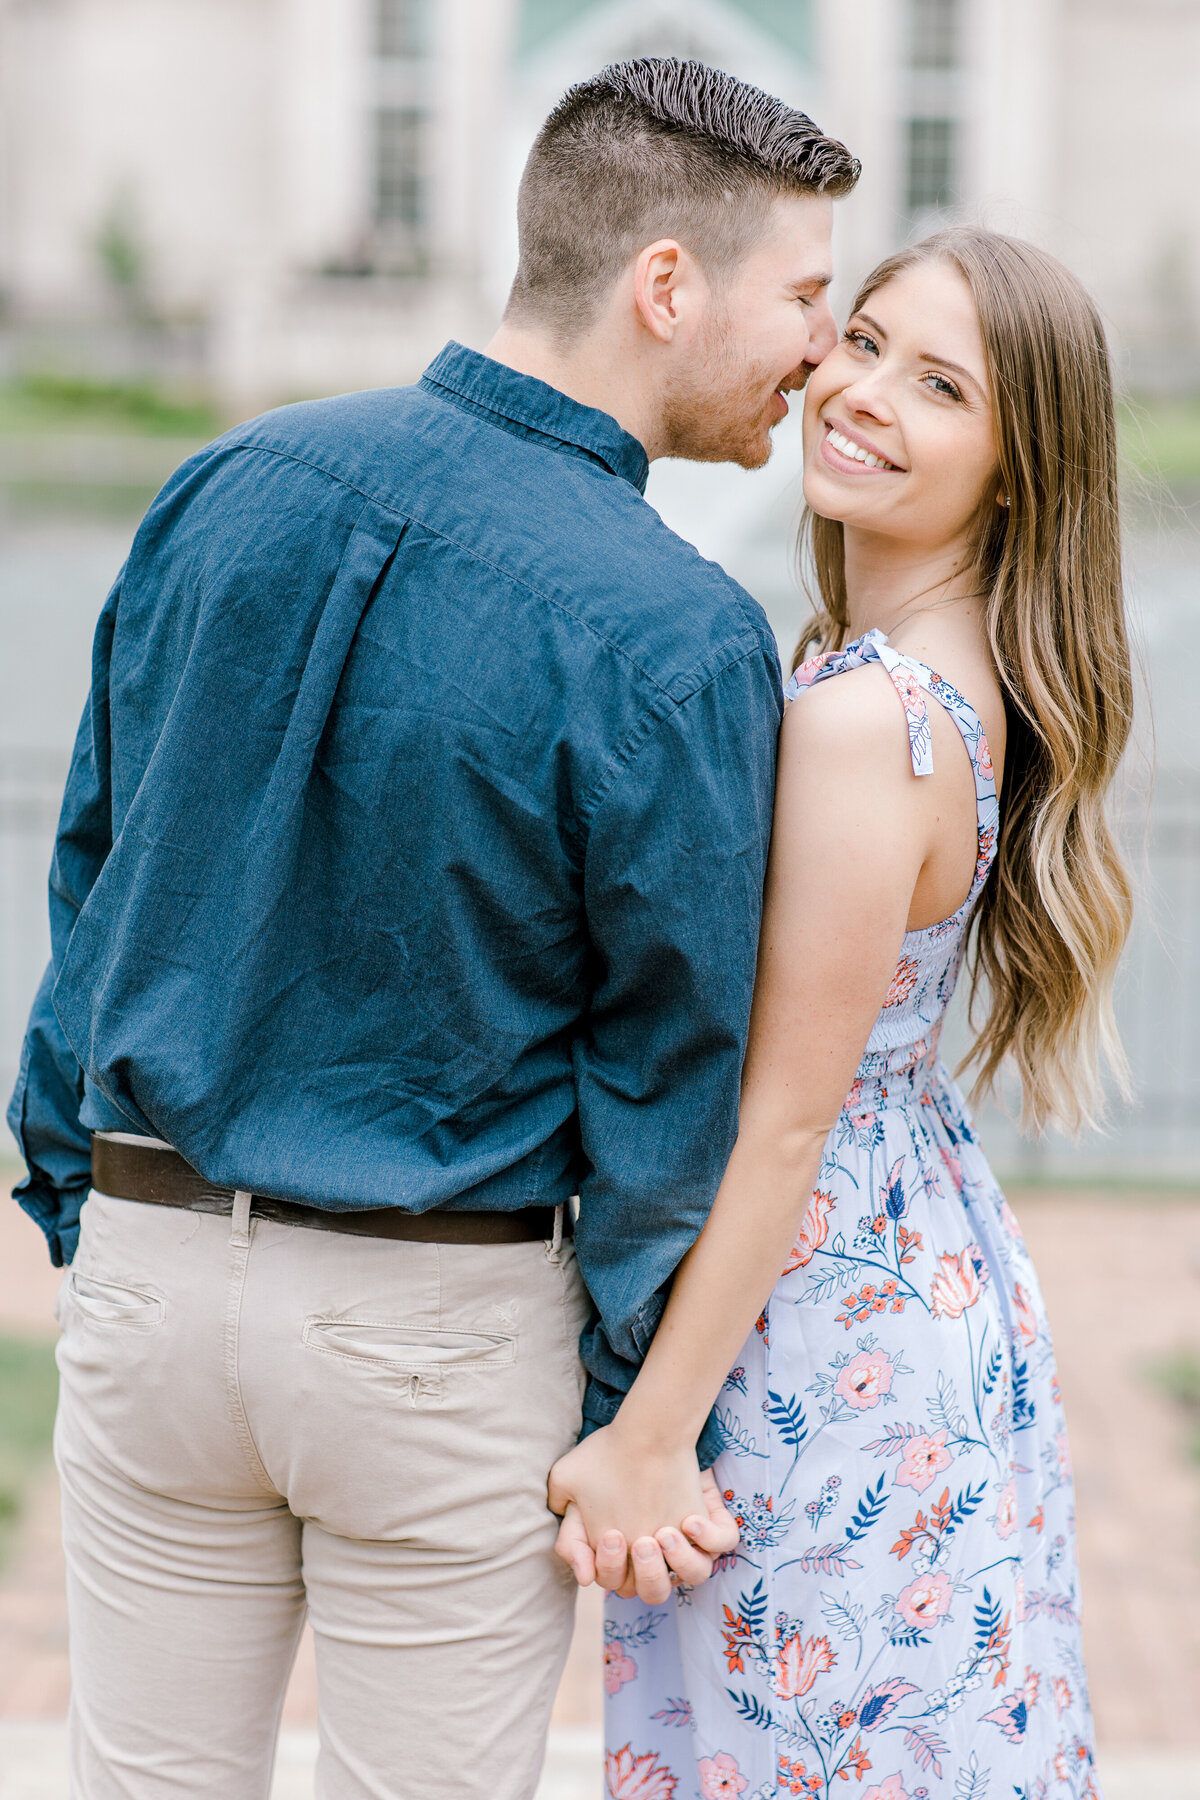 Hershey Garden Engagement Session Photography Photo-50